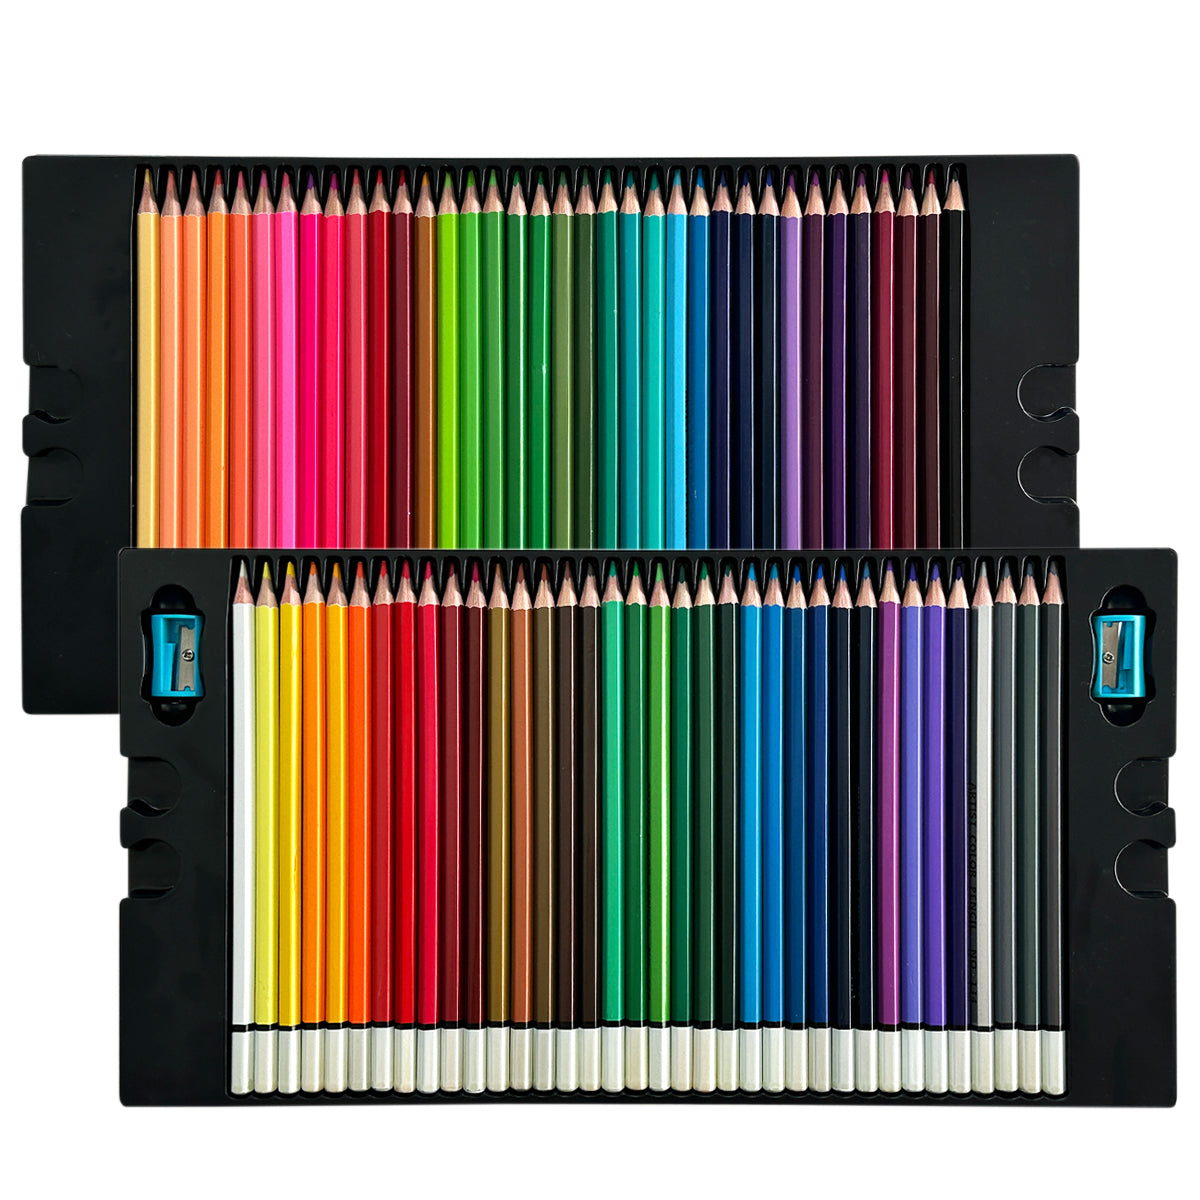 12 Metallic Colouring Pencils, Colouring Pencils for Adults